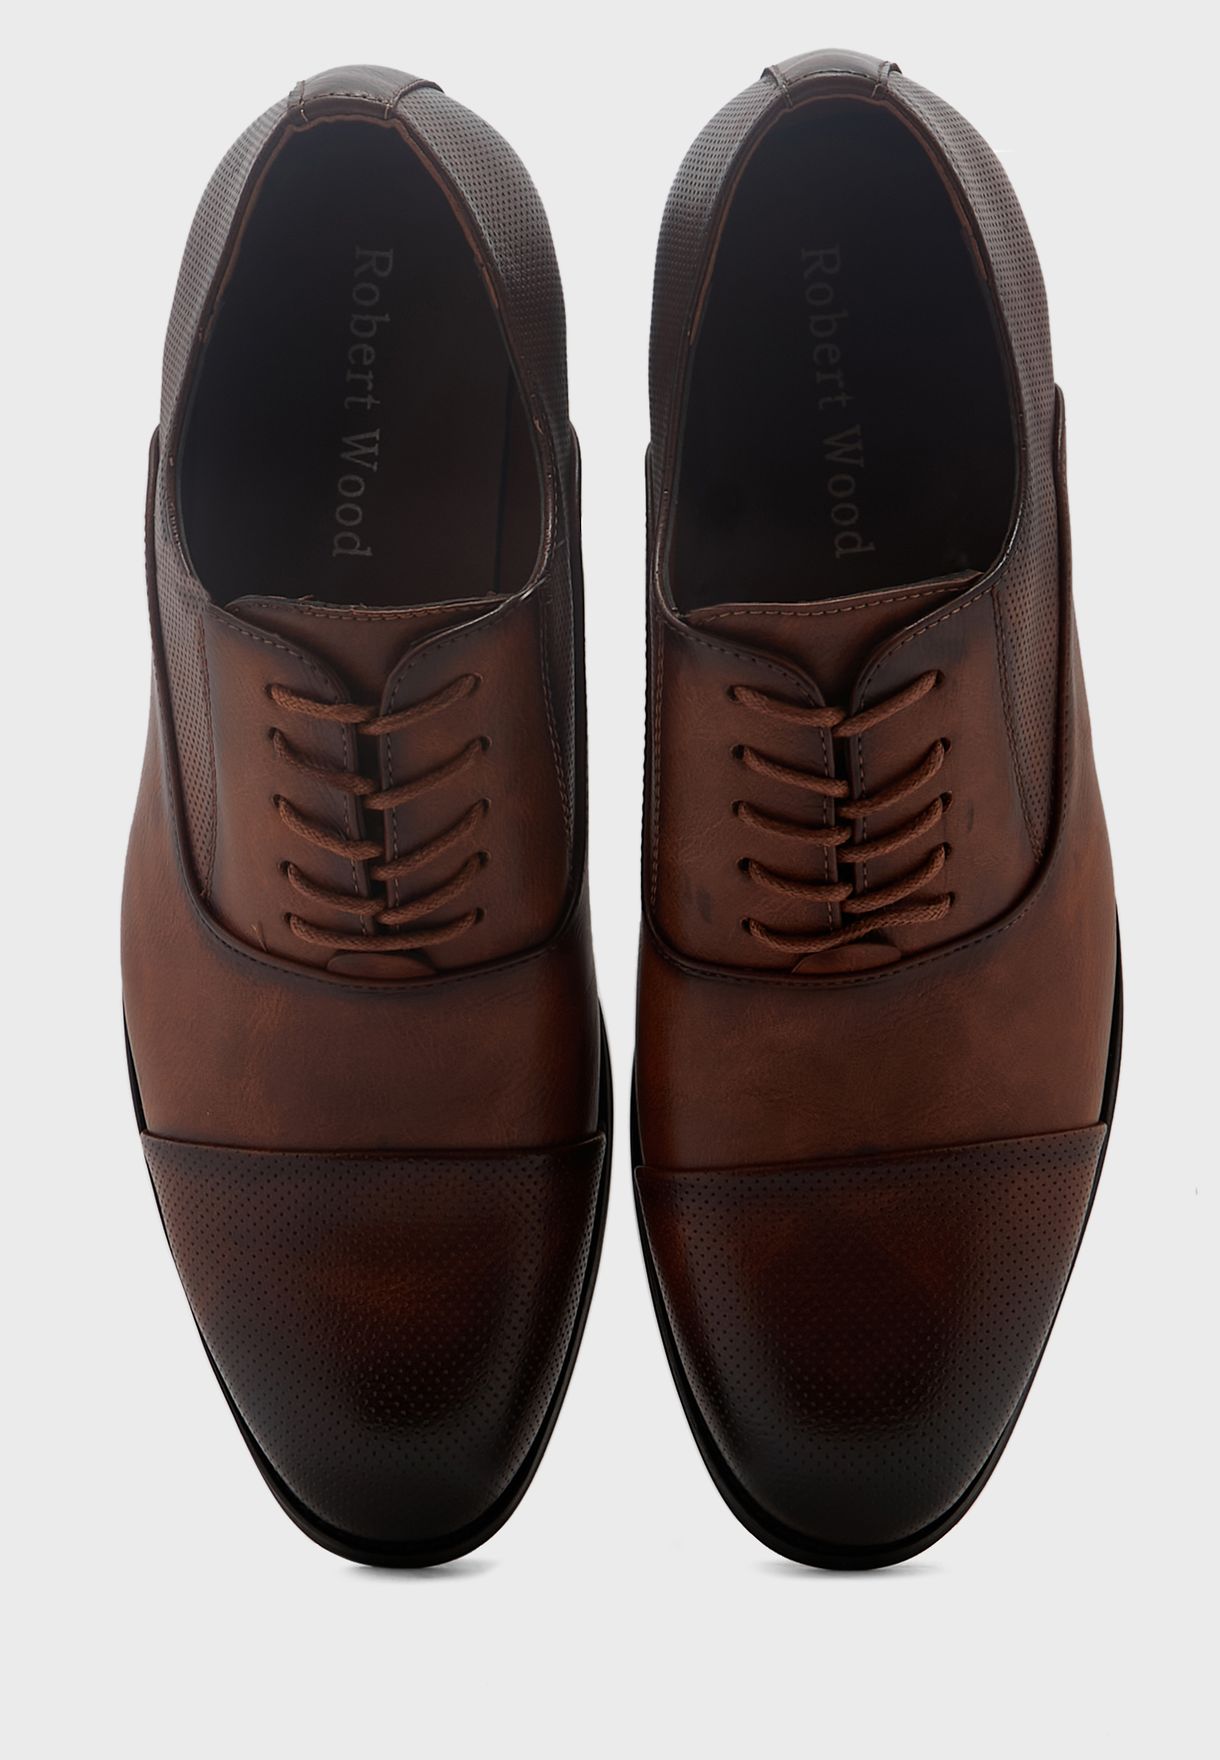 Classic Oxford Formal Lace Ups